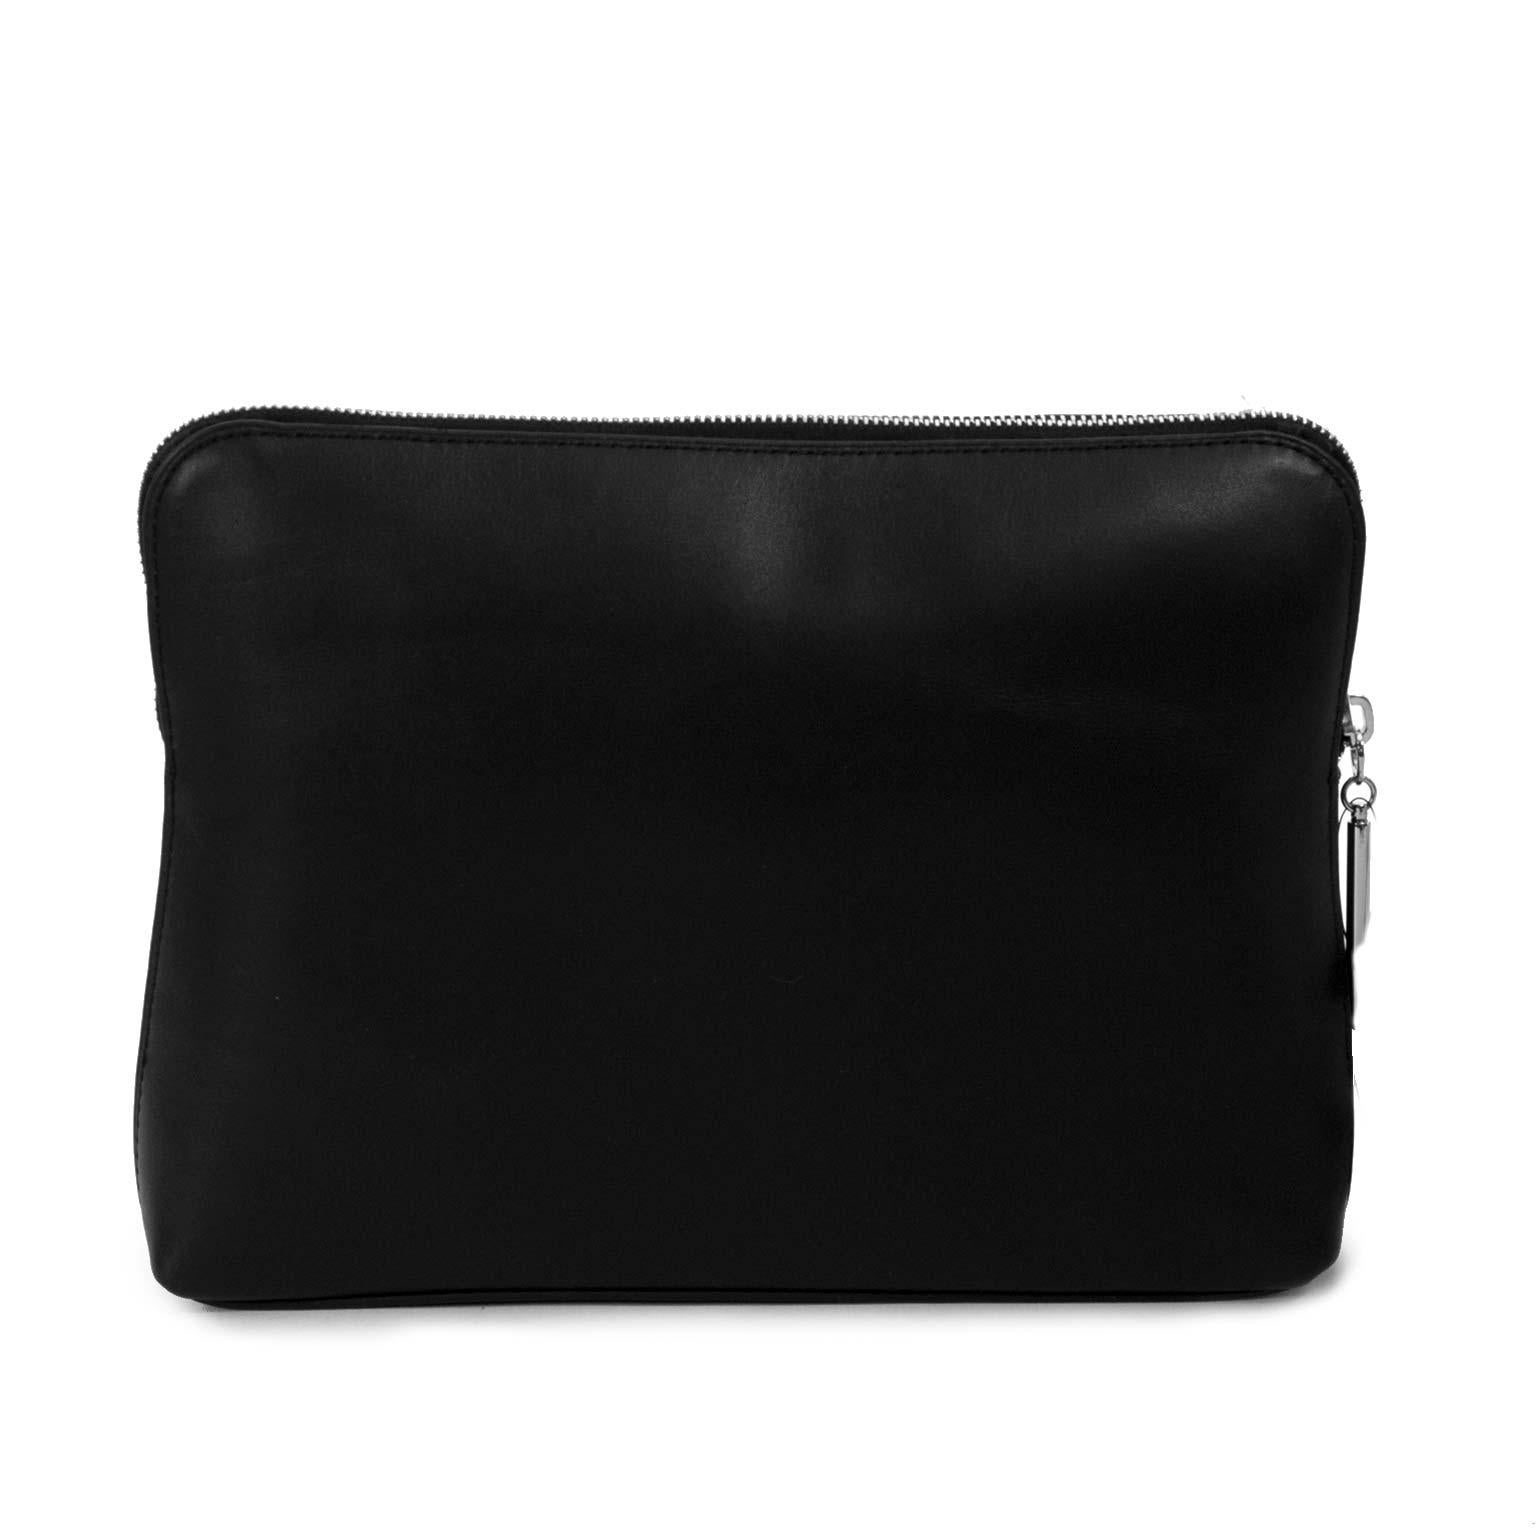 Black 3.1 Phillip Lim 31 Minute Suede-Fringed Metallic Leather Clutch For Sale